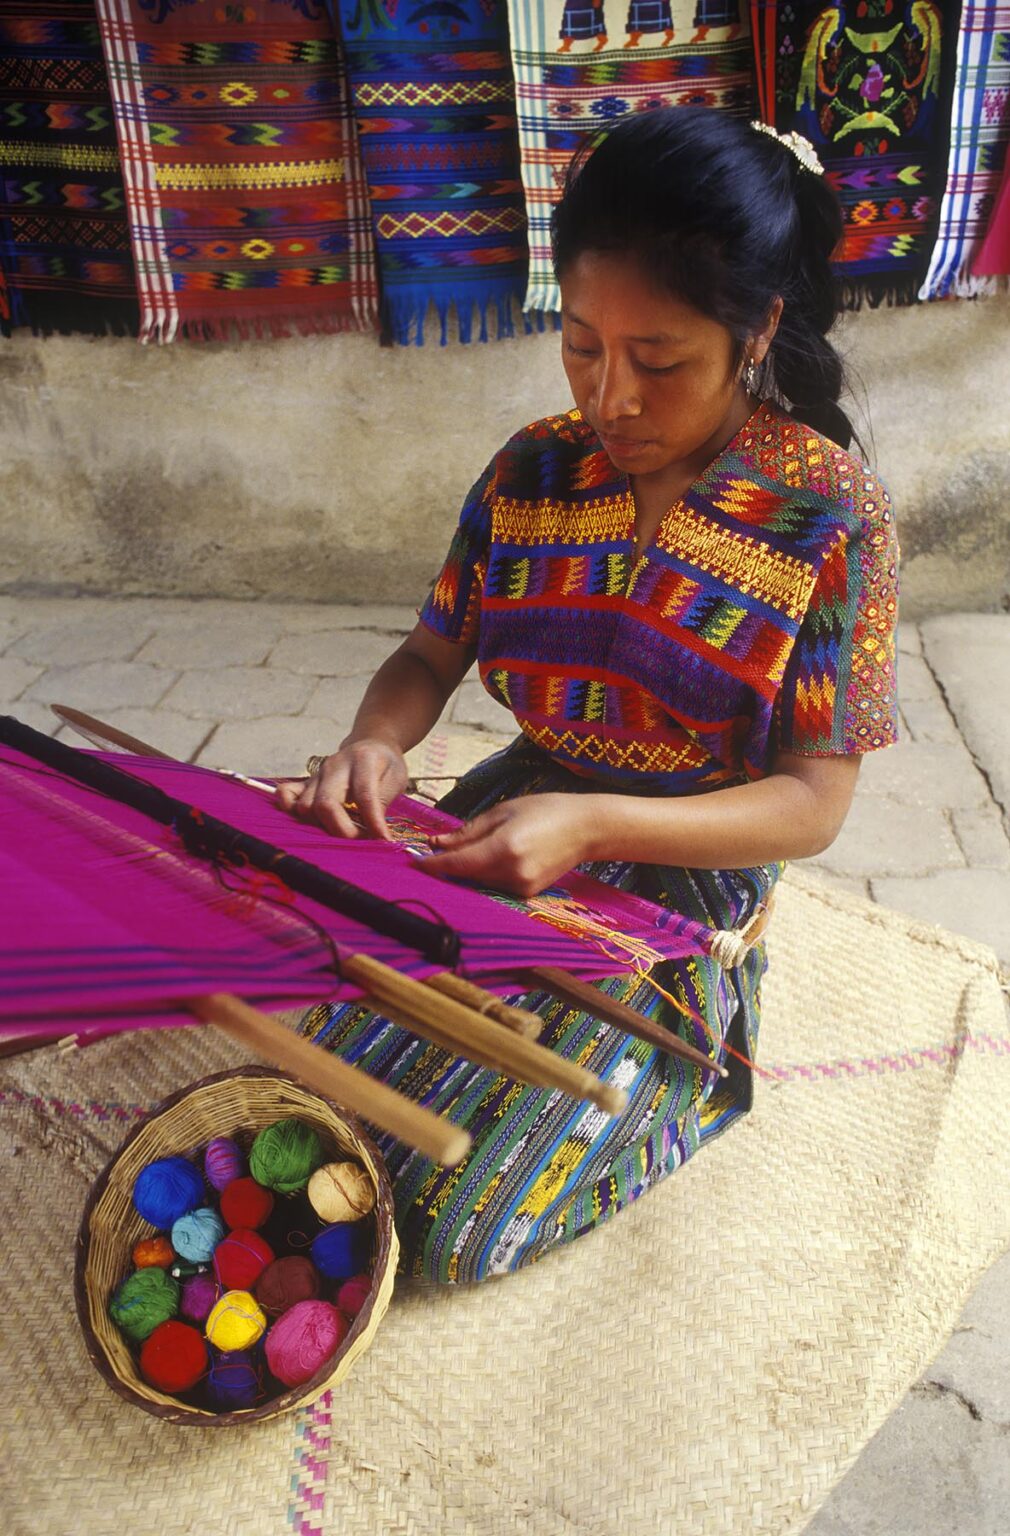 INDIGENOUS WOMAN with traditional BACKSTRAP LOOM weaving a HUIPIL, a traditional brocade cloth - GUATEMALA